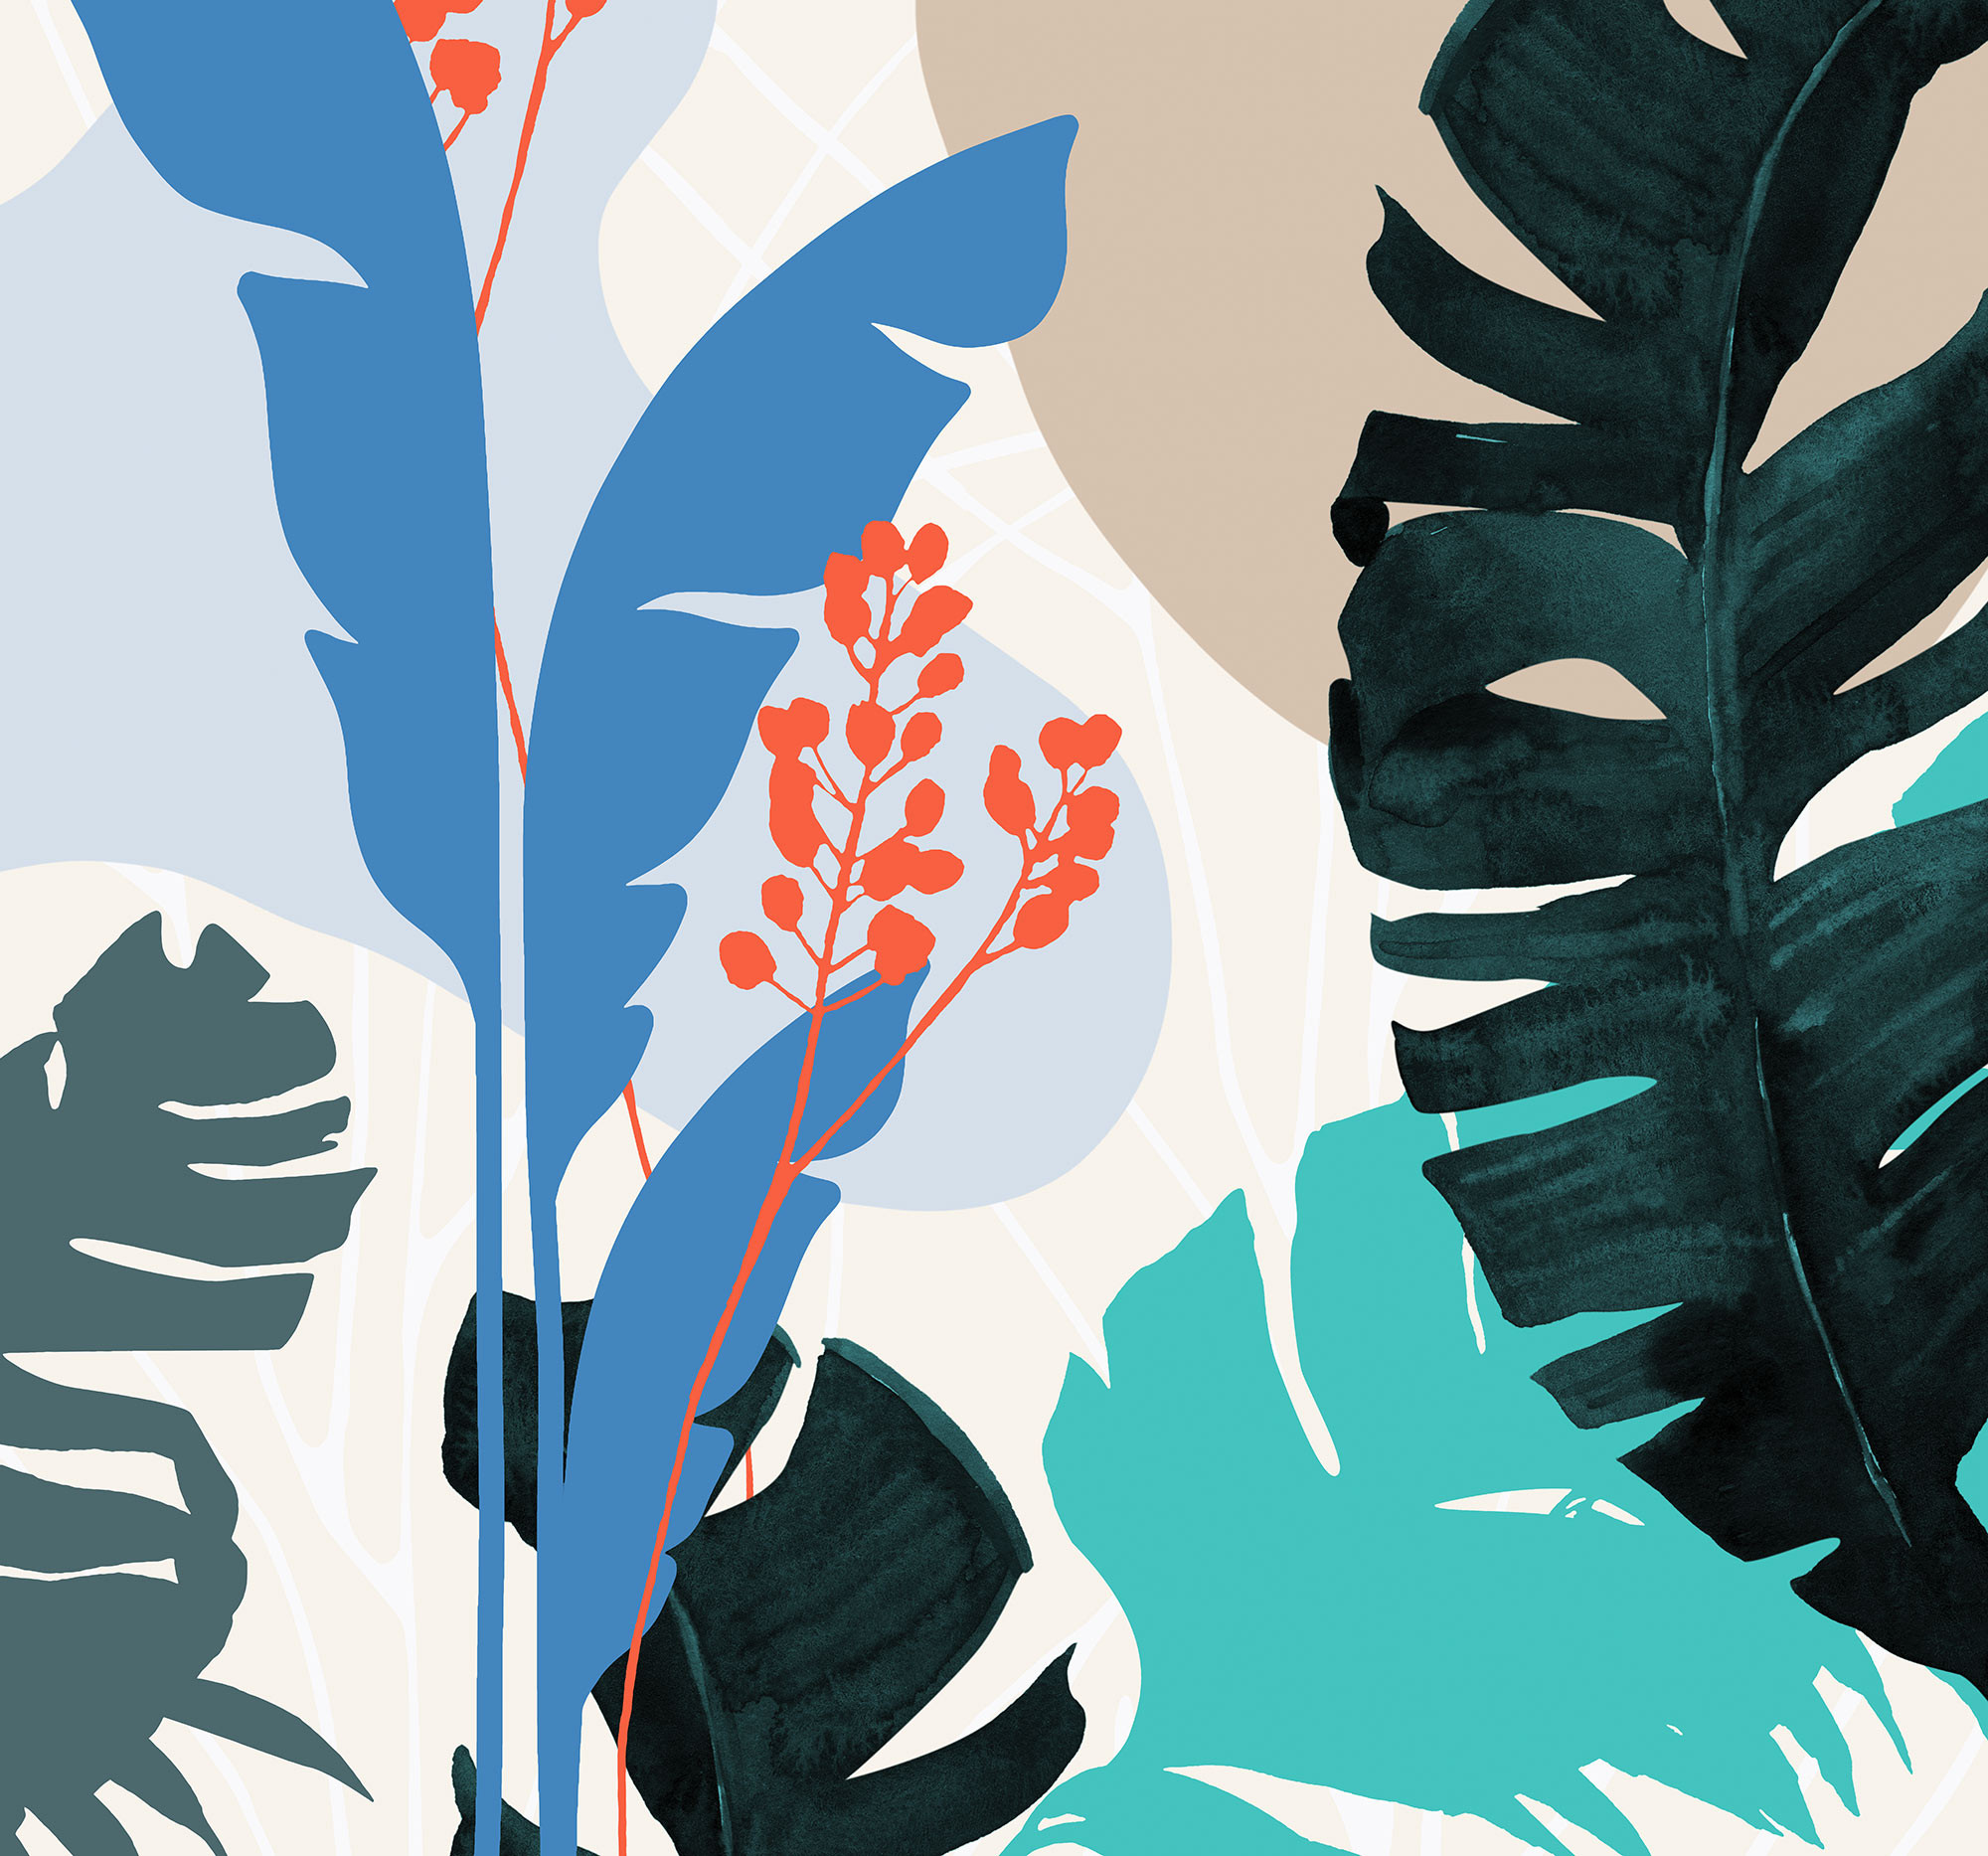 Tropical Shapes